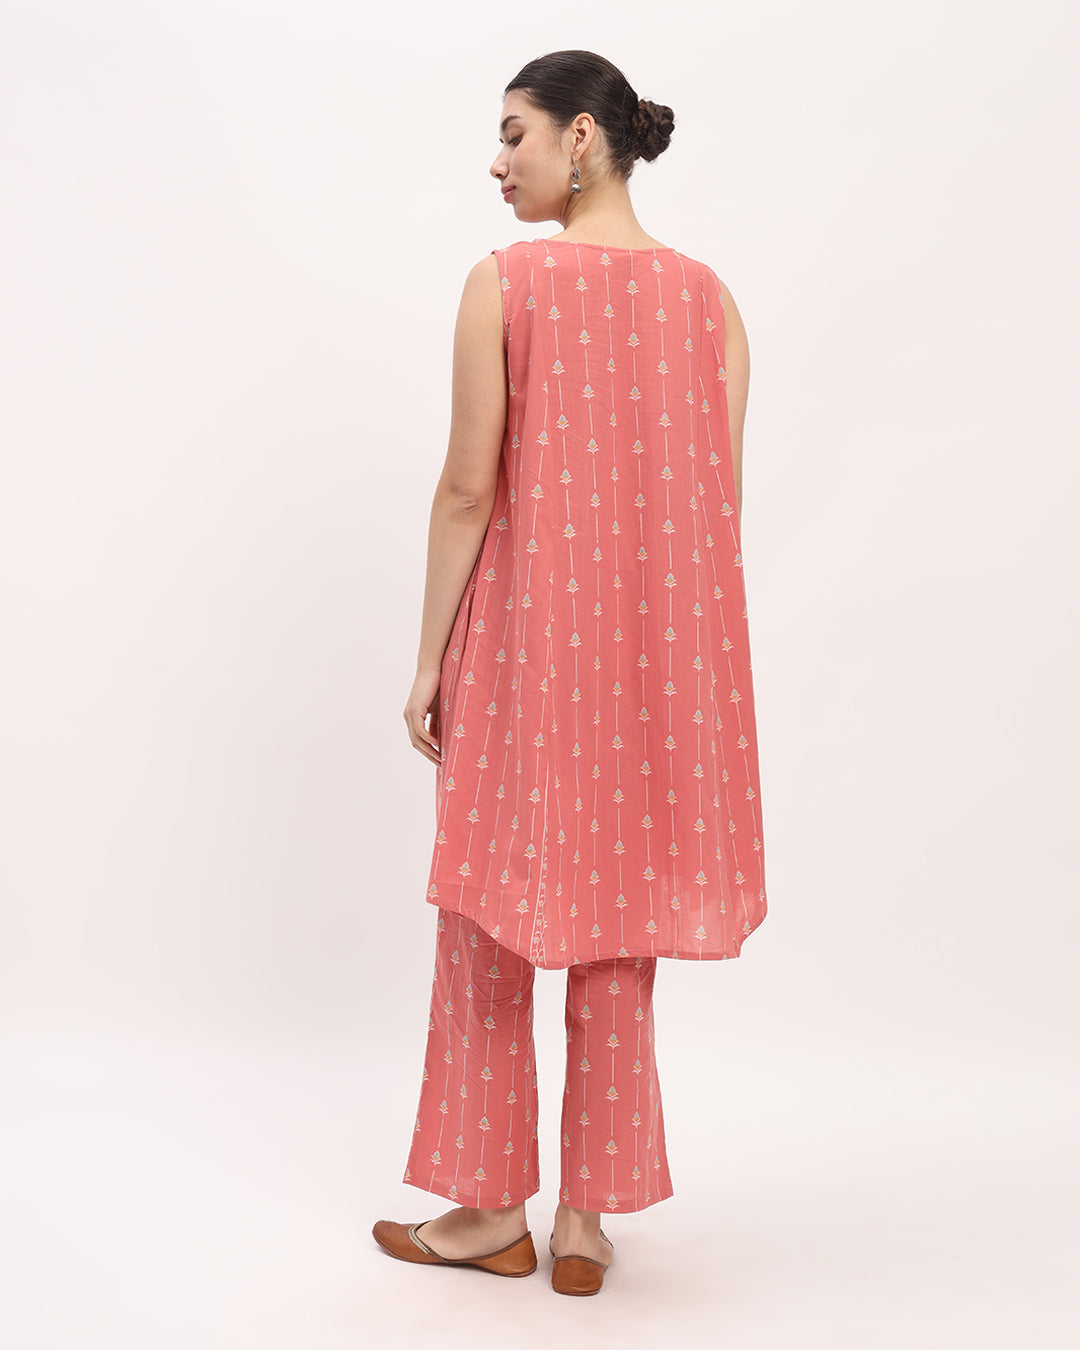 English Floral Tracks Sleeveless A-Line Printed Kurta (Without Bottoms)